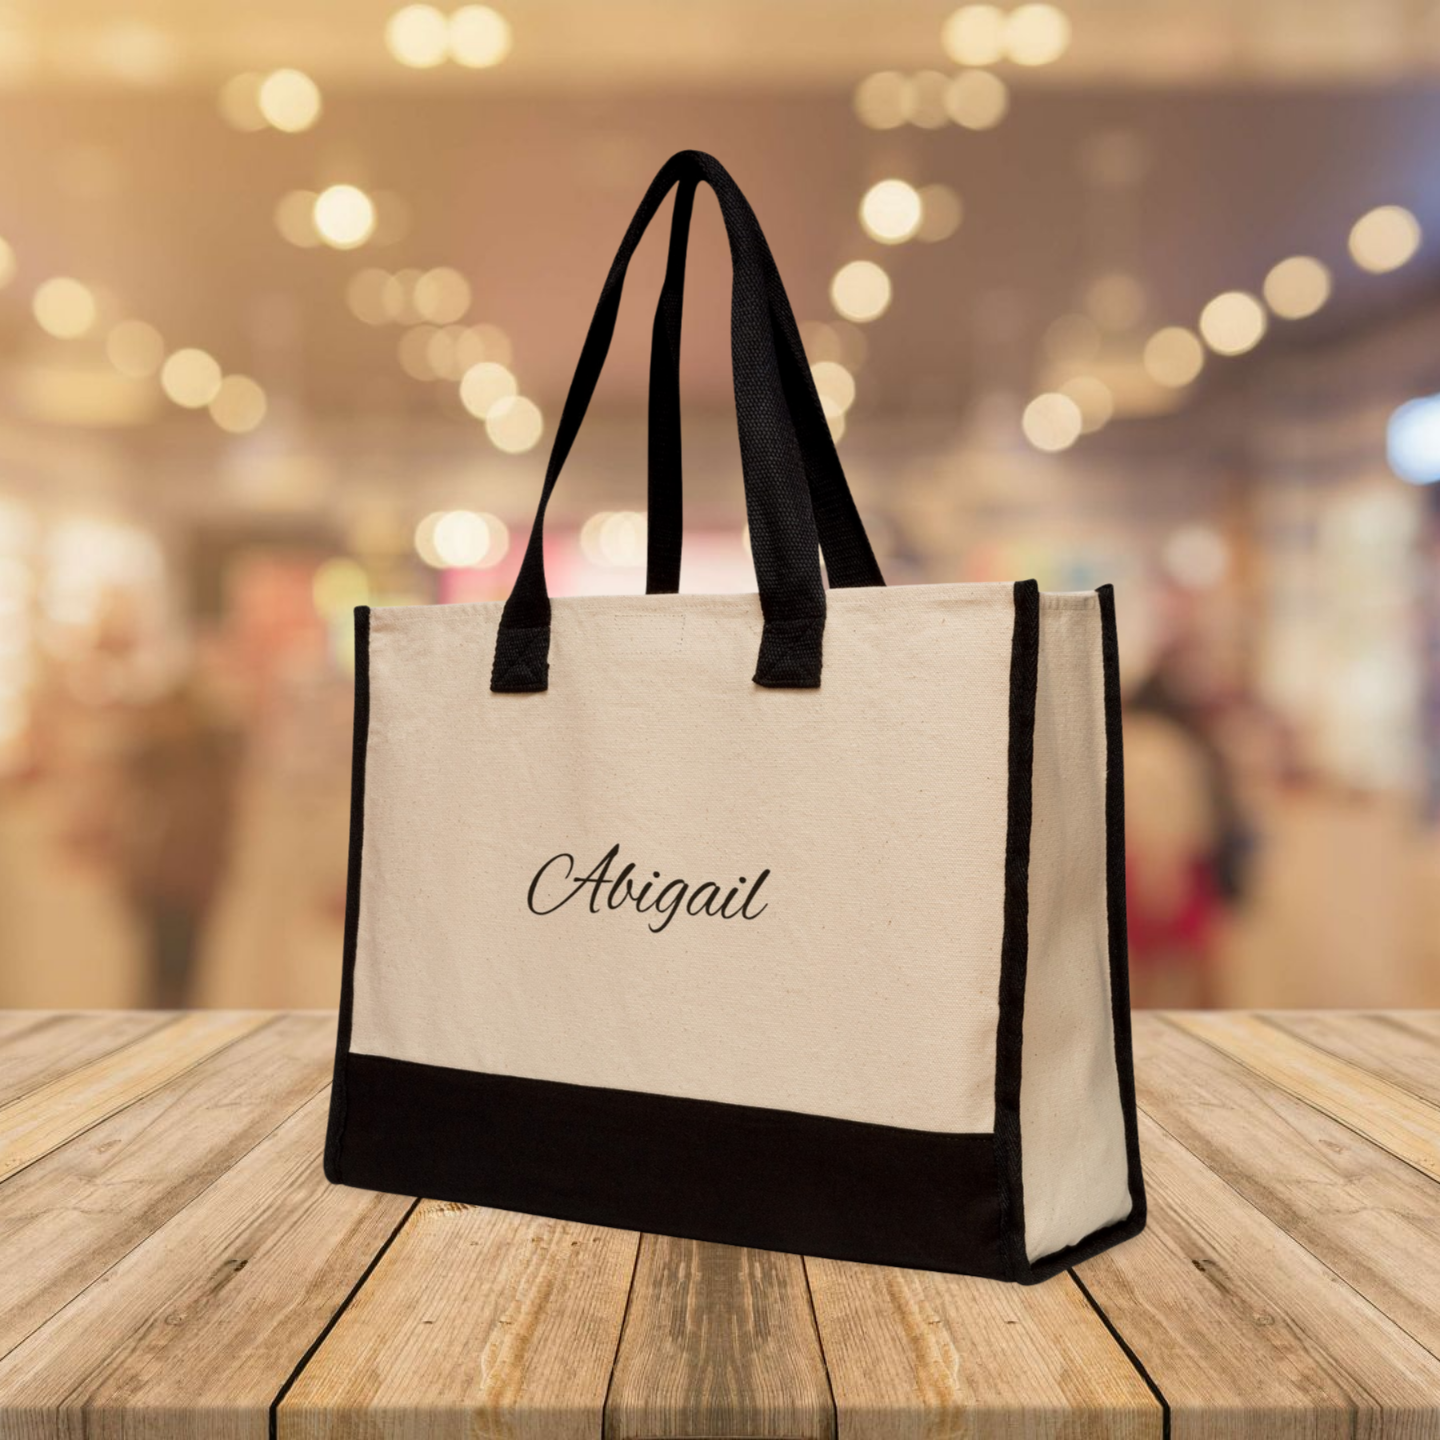 Get trendy with Personalized Premium Cotton Tote Bag -  available at Good Gift Company. Grab yours for $23 today!